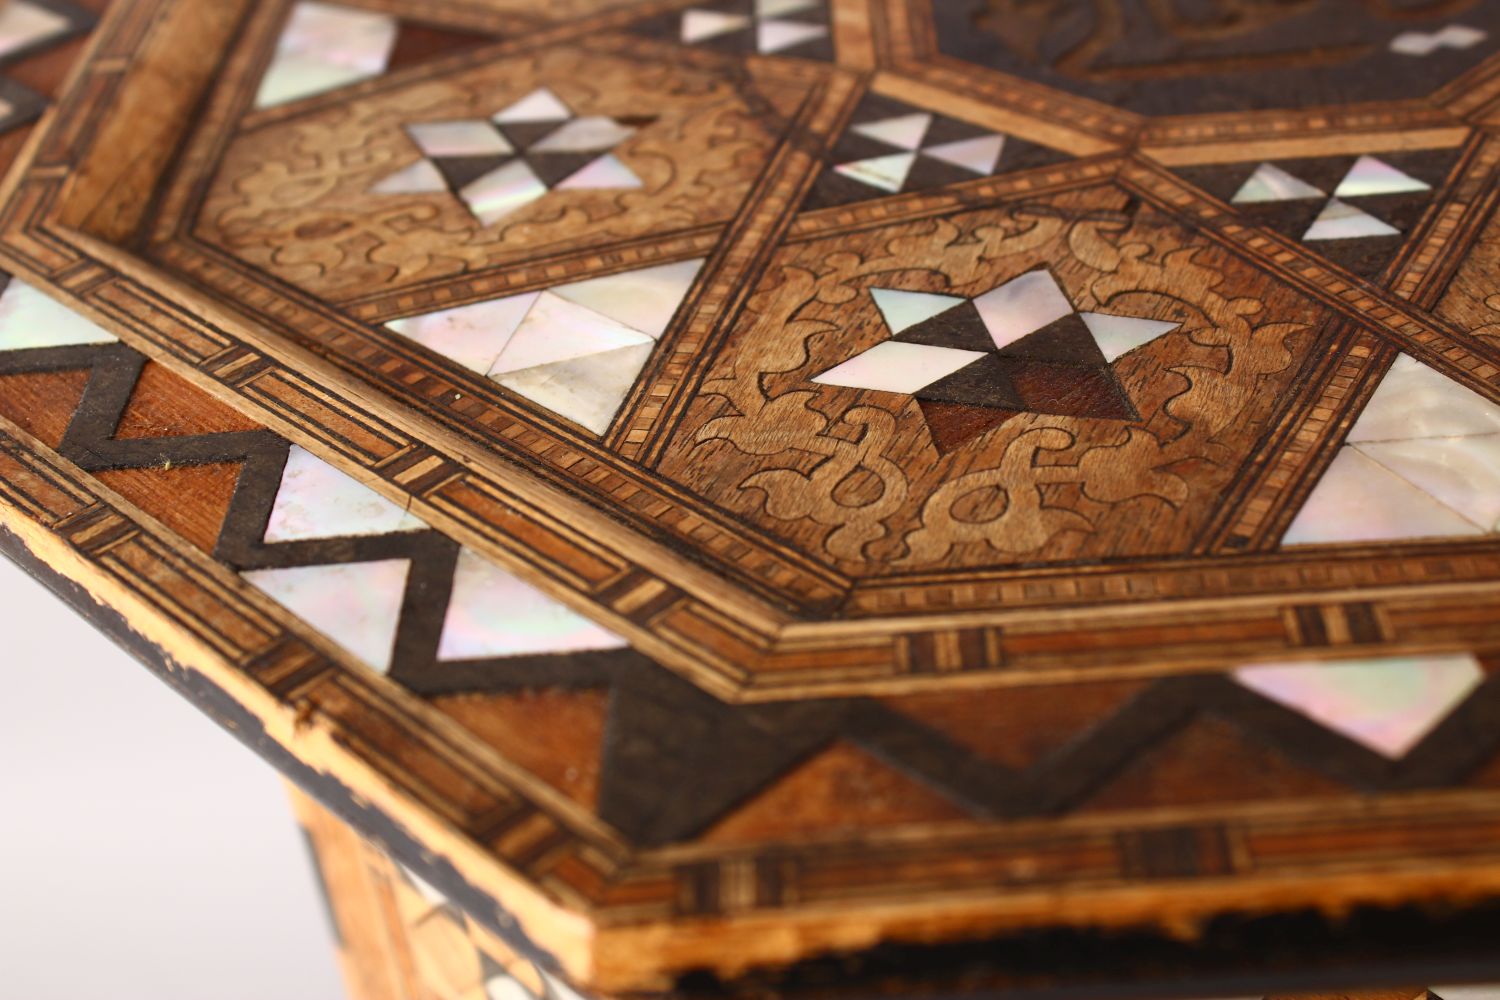 A FINE 19TH CENTURY TURKISH OTTOMAN MOTHER OF PEARL INLAID OCTAGONAL WOODEN TABLE, The top with - Image 4 of 6